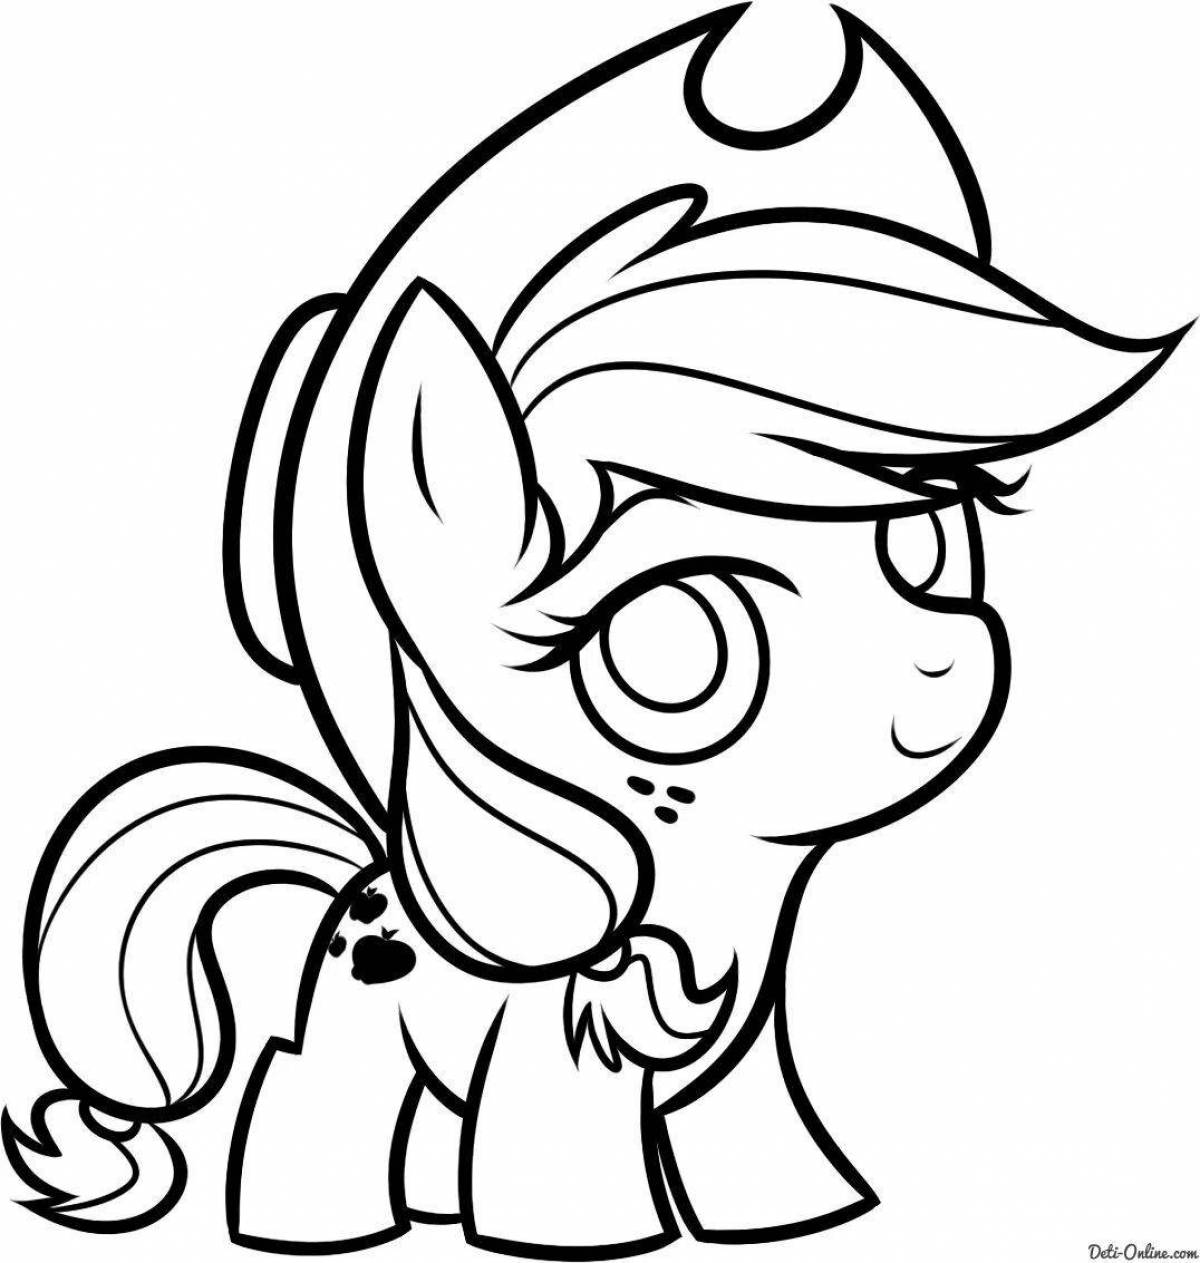 Coloring book adorable apple jack